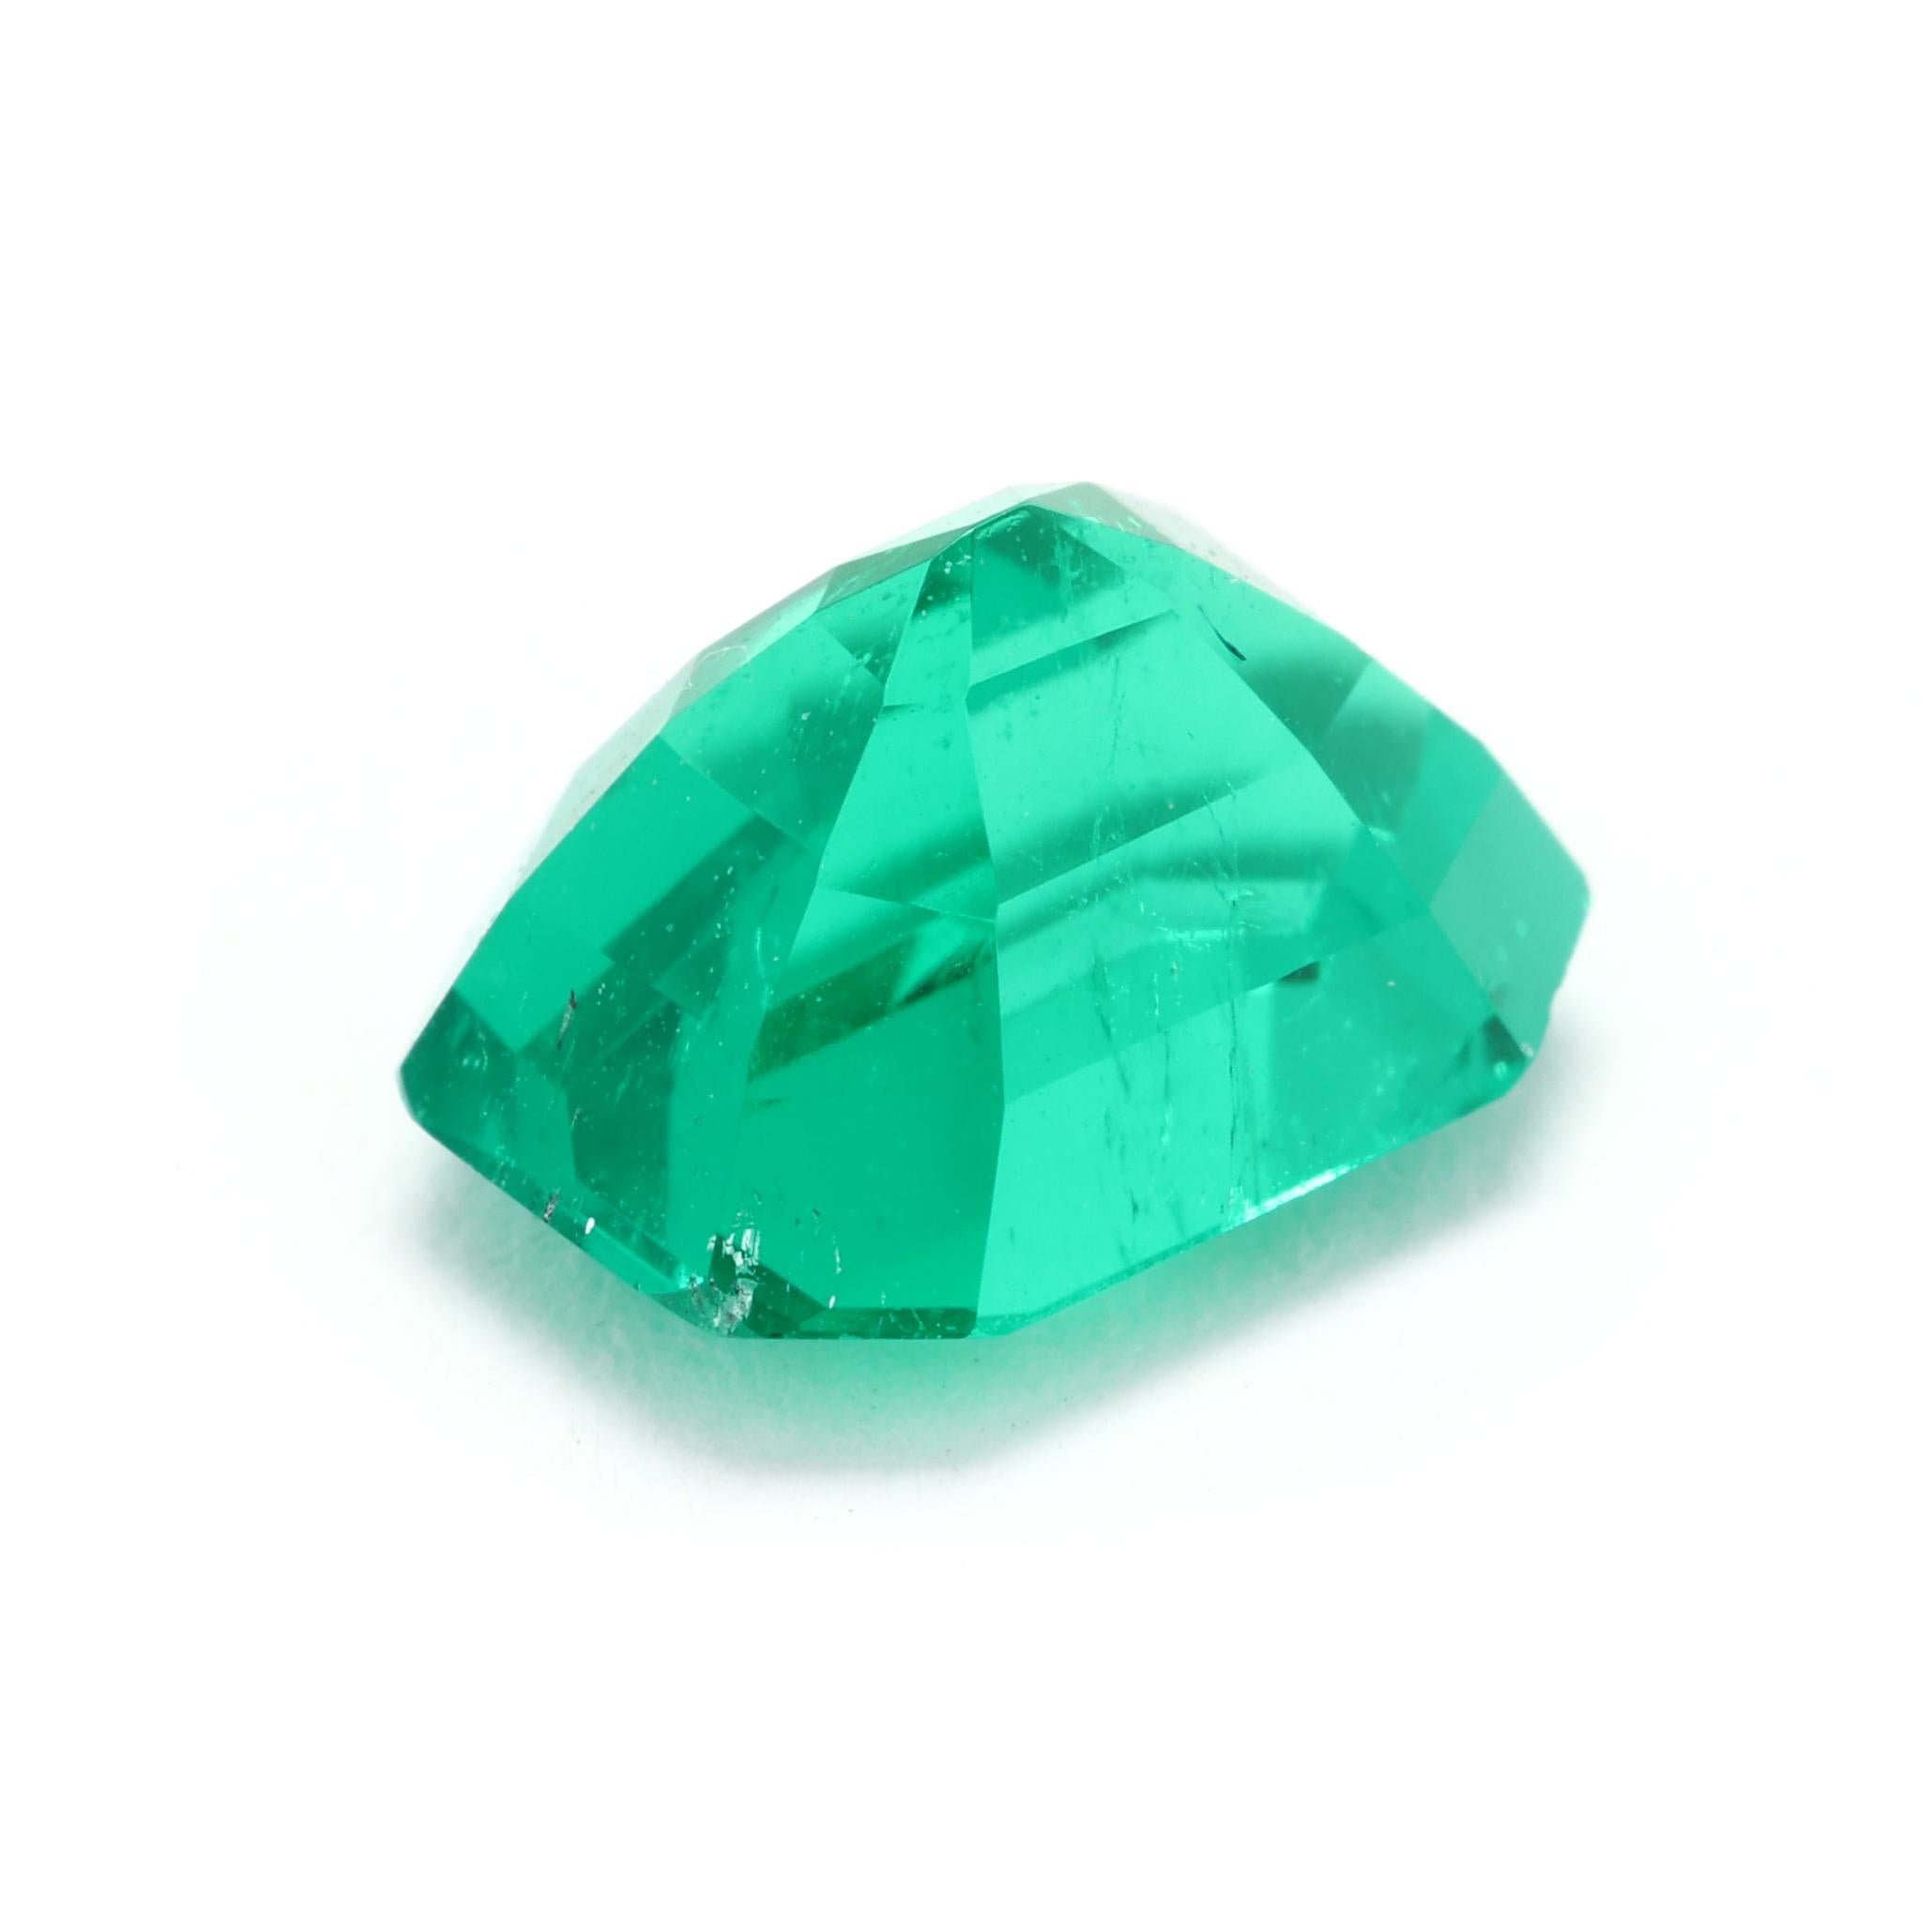 Women's or Men's 1.32 Carat Loose Natural Emerald Gemstone GIA Emerald Cut Solitaire For Sale